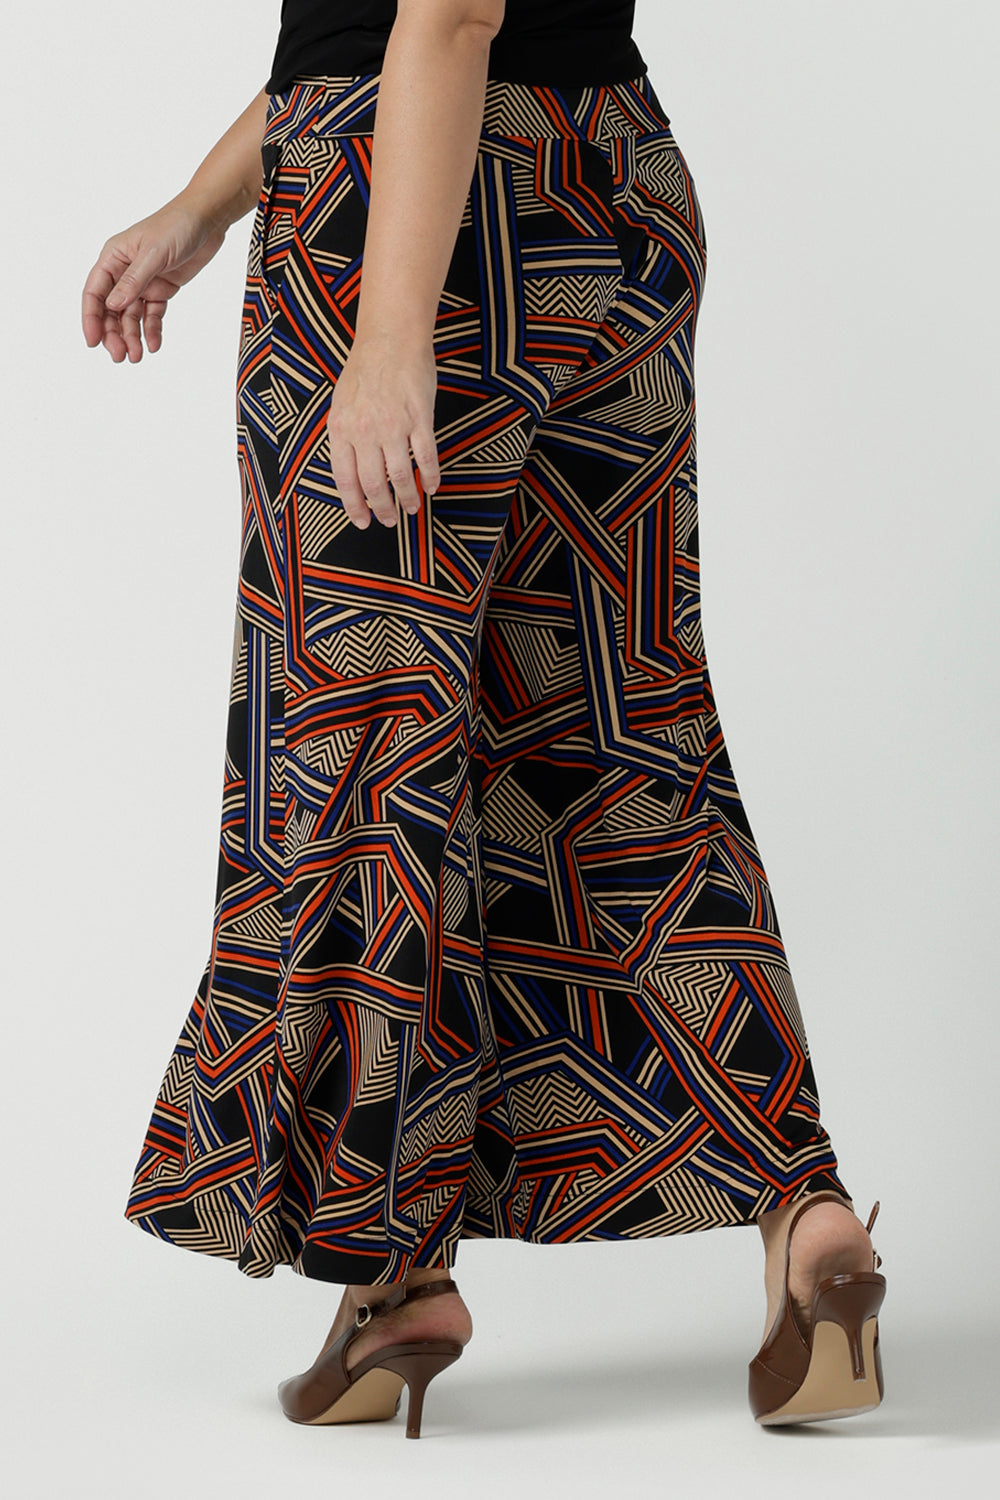 Back view of a size 10 woman wearing the Dany Culotte in Trixie, a printed Jersey work pant with a geometric pattern. Wide leg with functional pockets and wide waistband. Cropped length and petite height friendly. Made in Australia for women size 8 - 24.